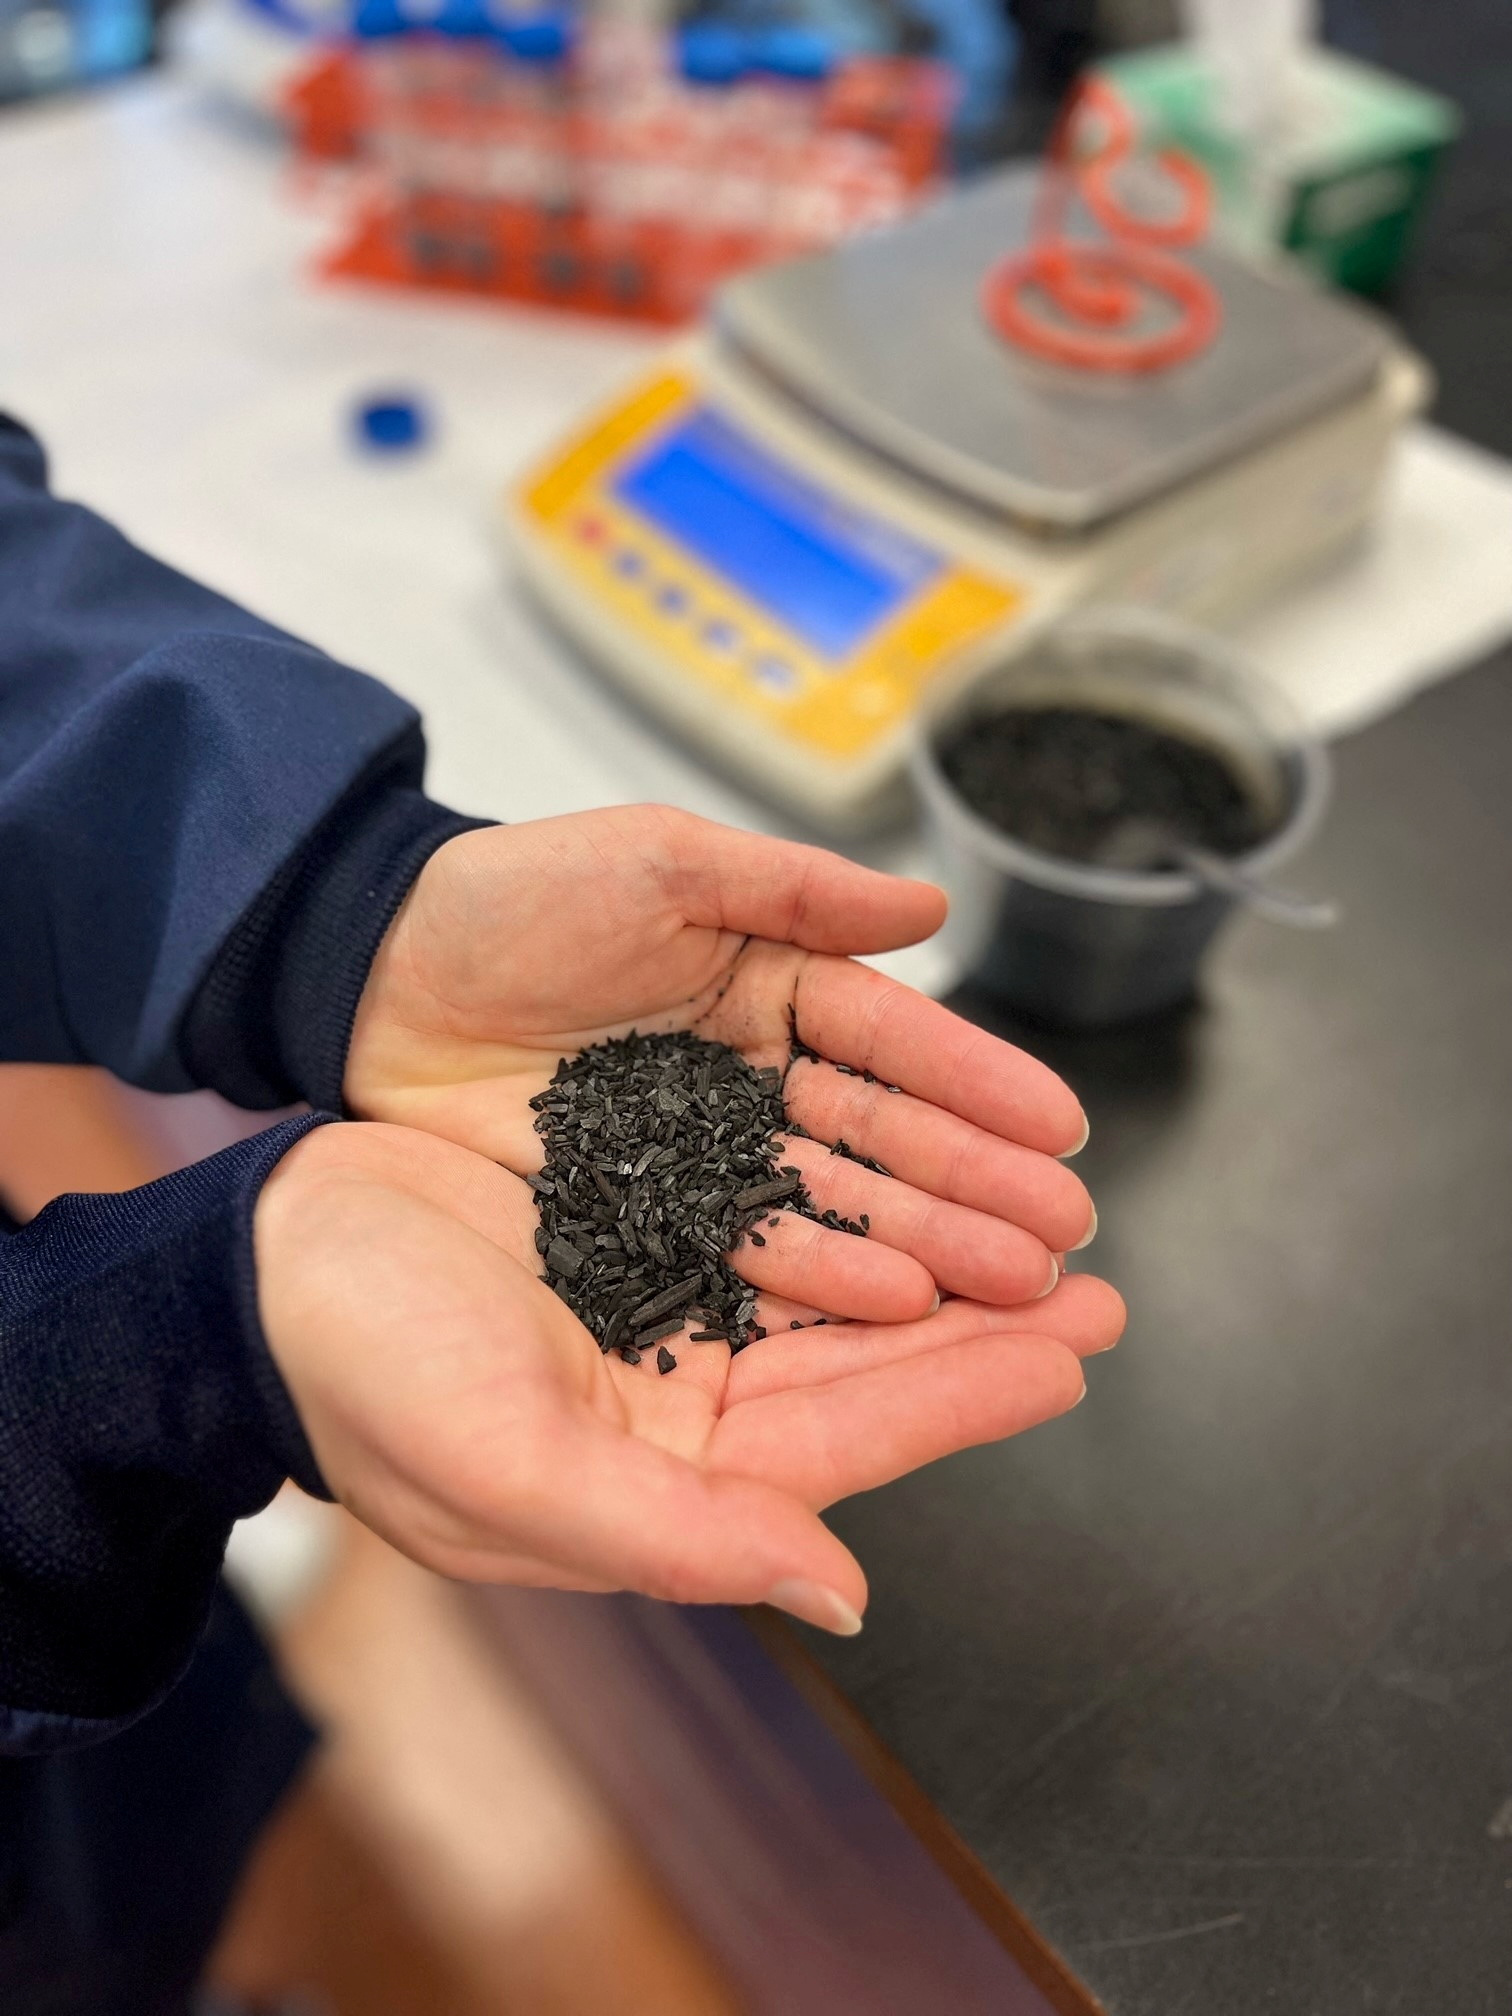 Scientist Vicky Levesque weighs biochar samples to measure the pH at Kentville Research Development Centre, in Kentville Nova Scotia